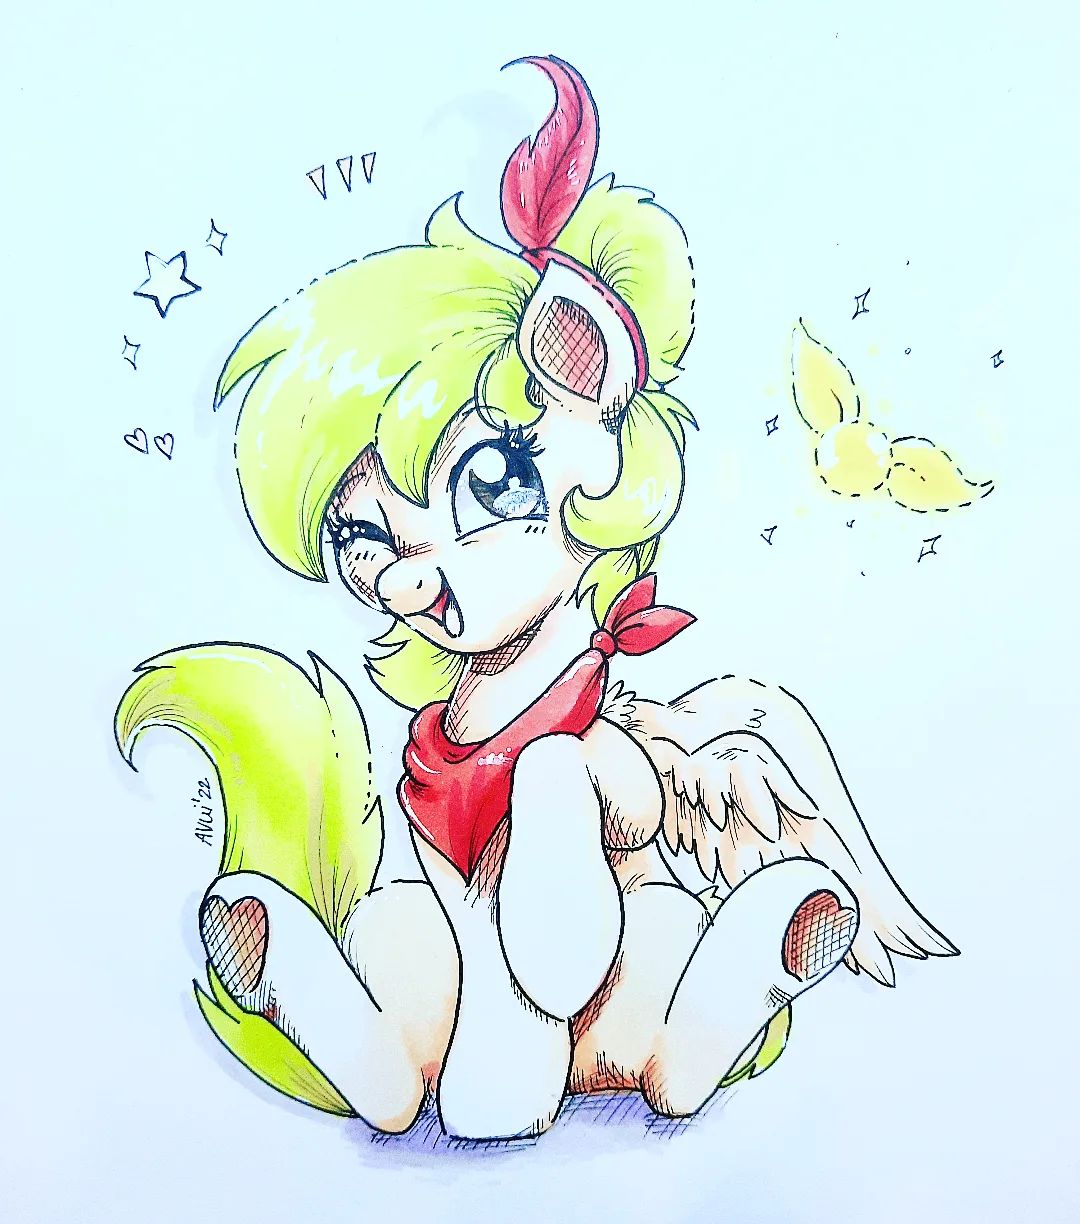 A traditional copic drawing made for @meplushyou !! I take these as commissions. Base price 25 euro including shipping worldwide!^^
.
.
.
#mlp #mylittleponyart #mylitlepony #brony